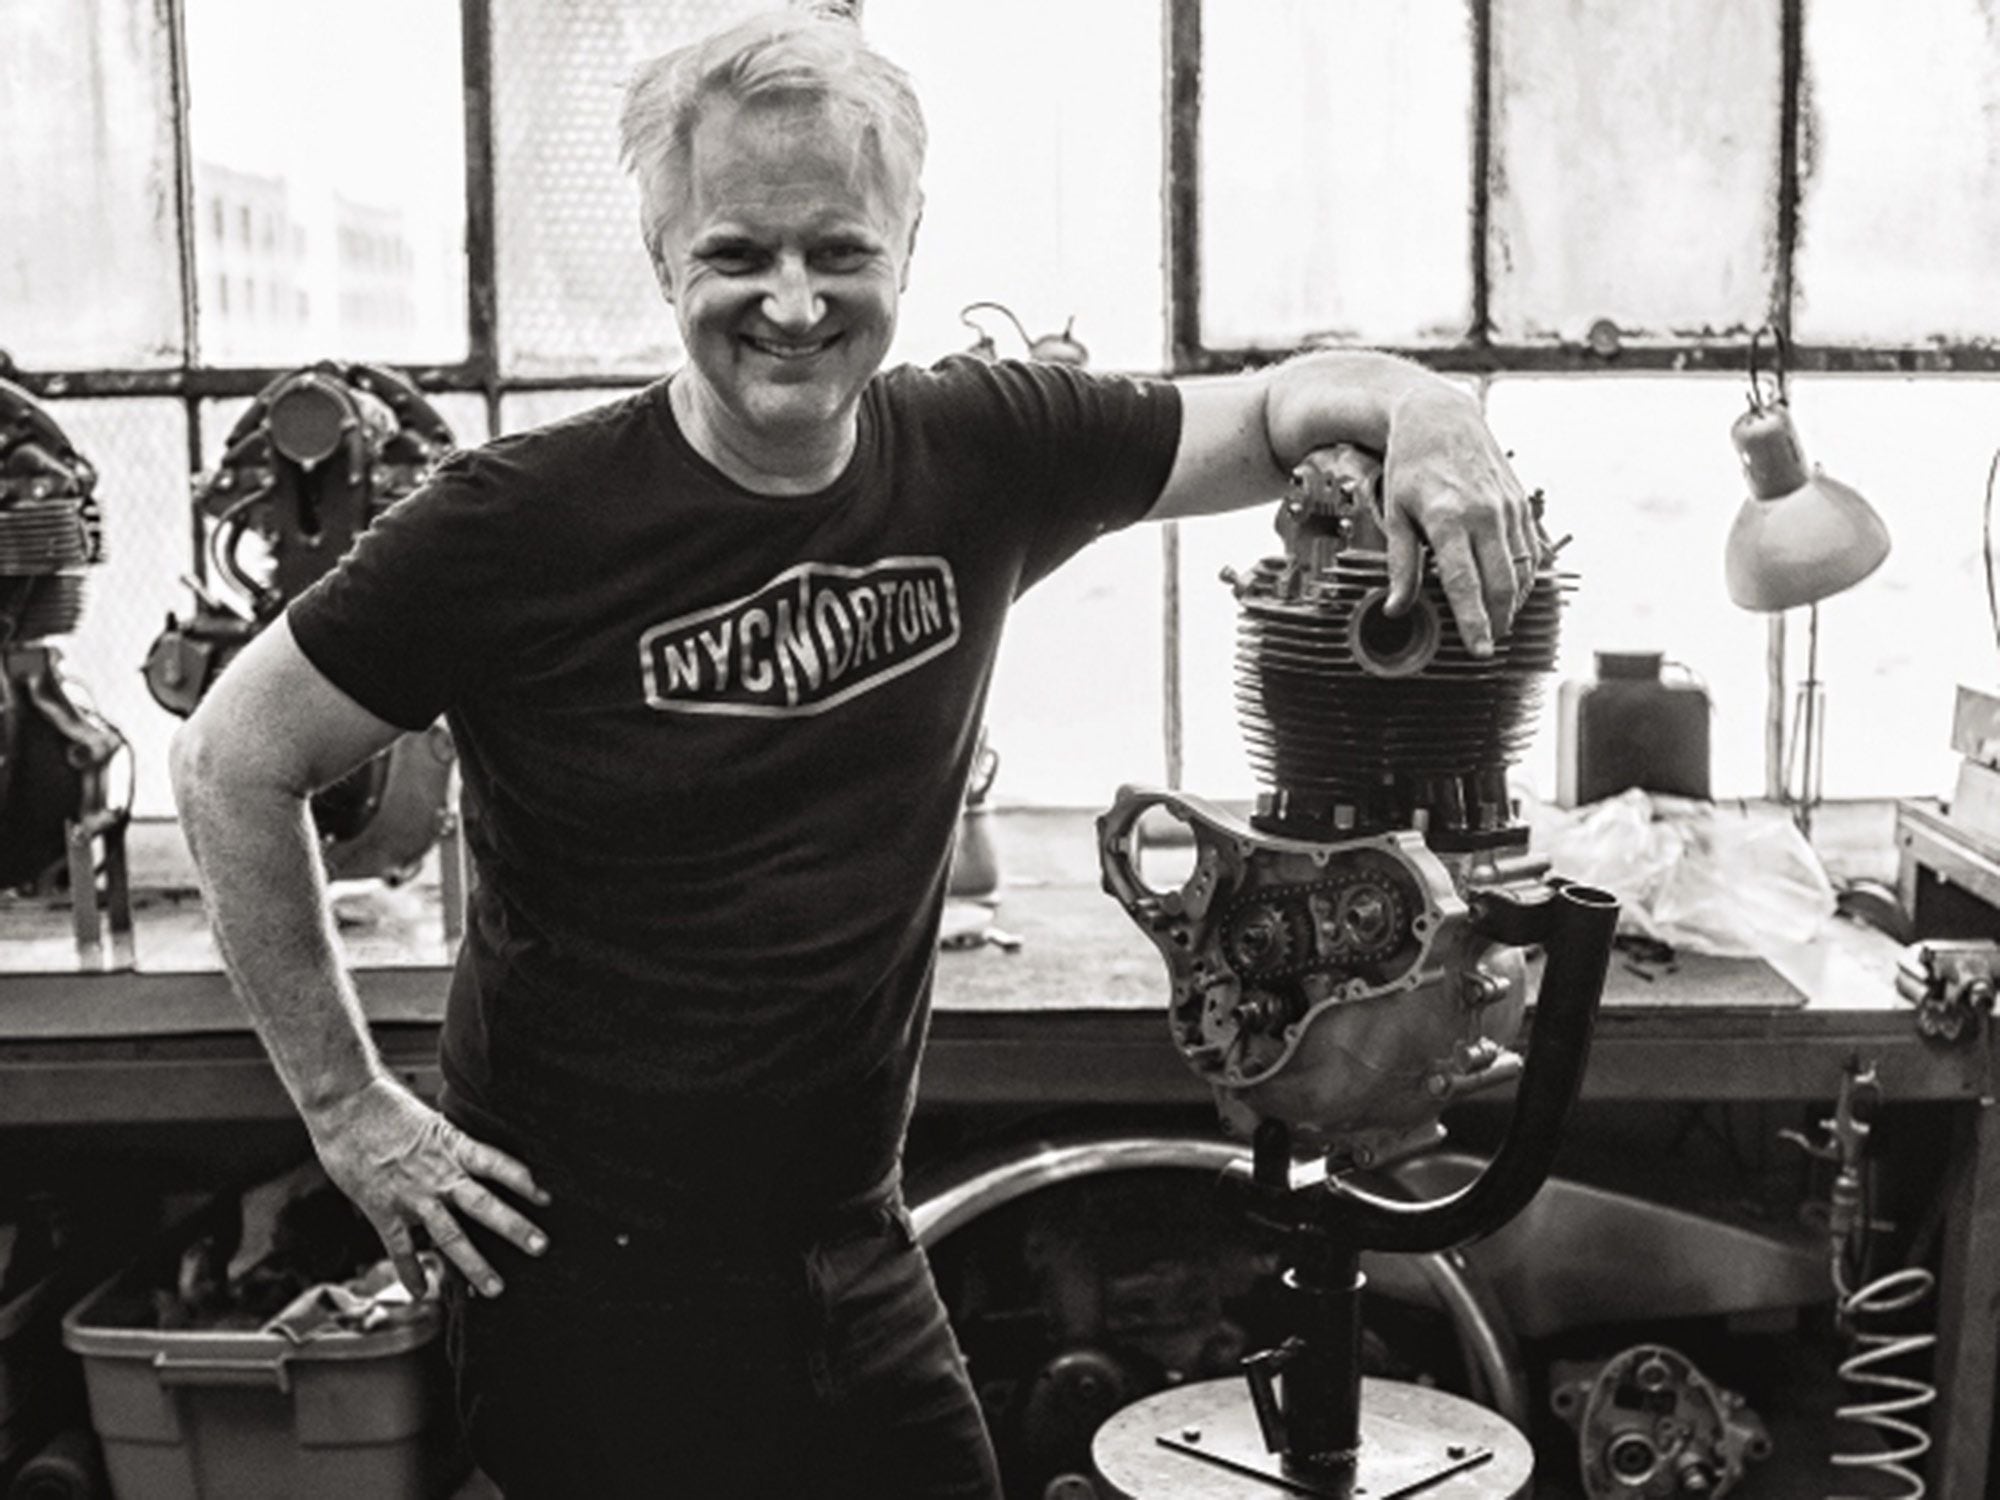 “I have the best job in the world,” Cummings says. “I have wonderful customers who pay me to make the most beautiful thing in the world. I’m building the bikes knowing my customer and what they want to get out of them.”